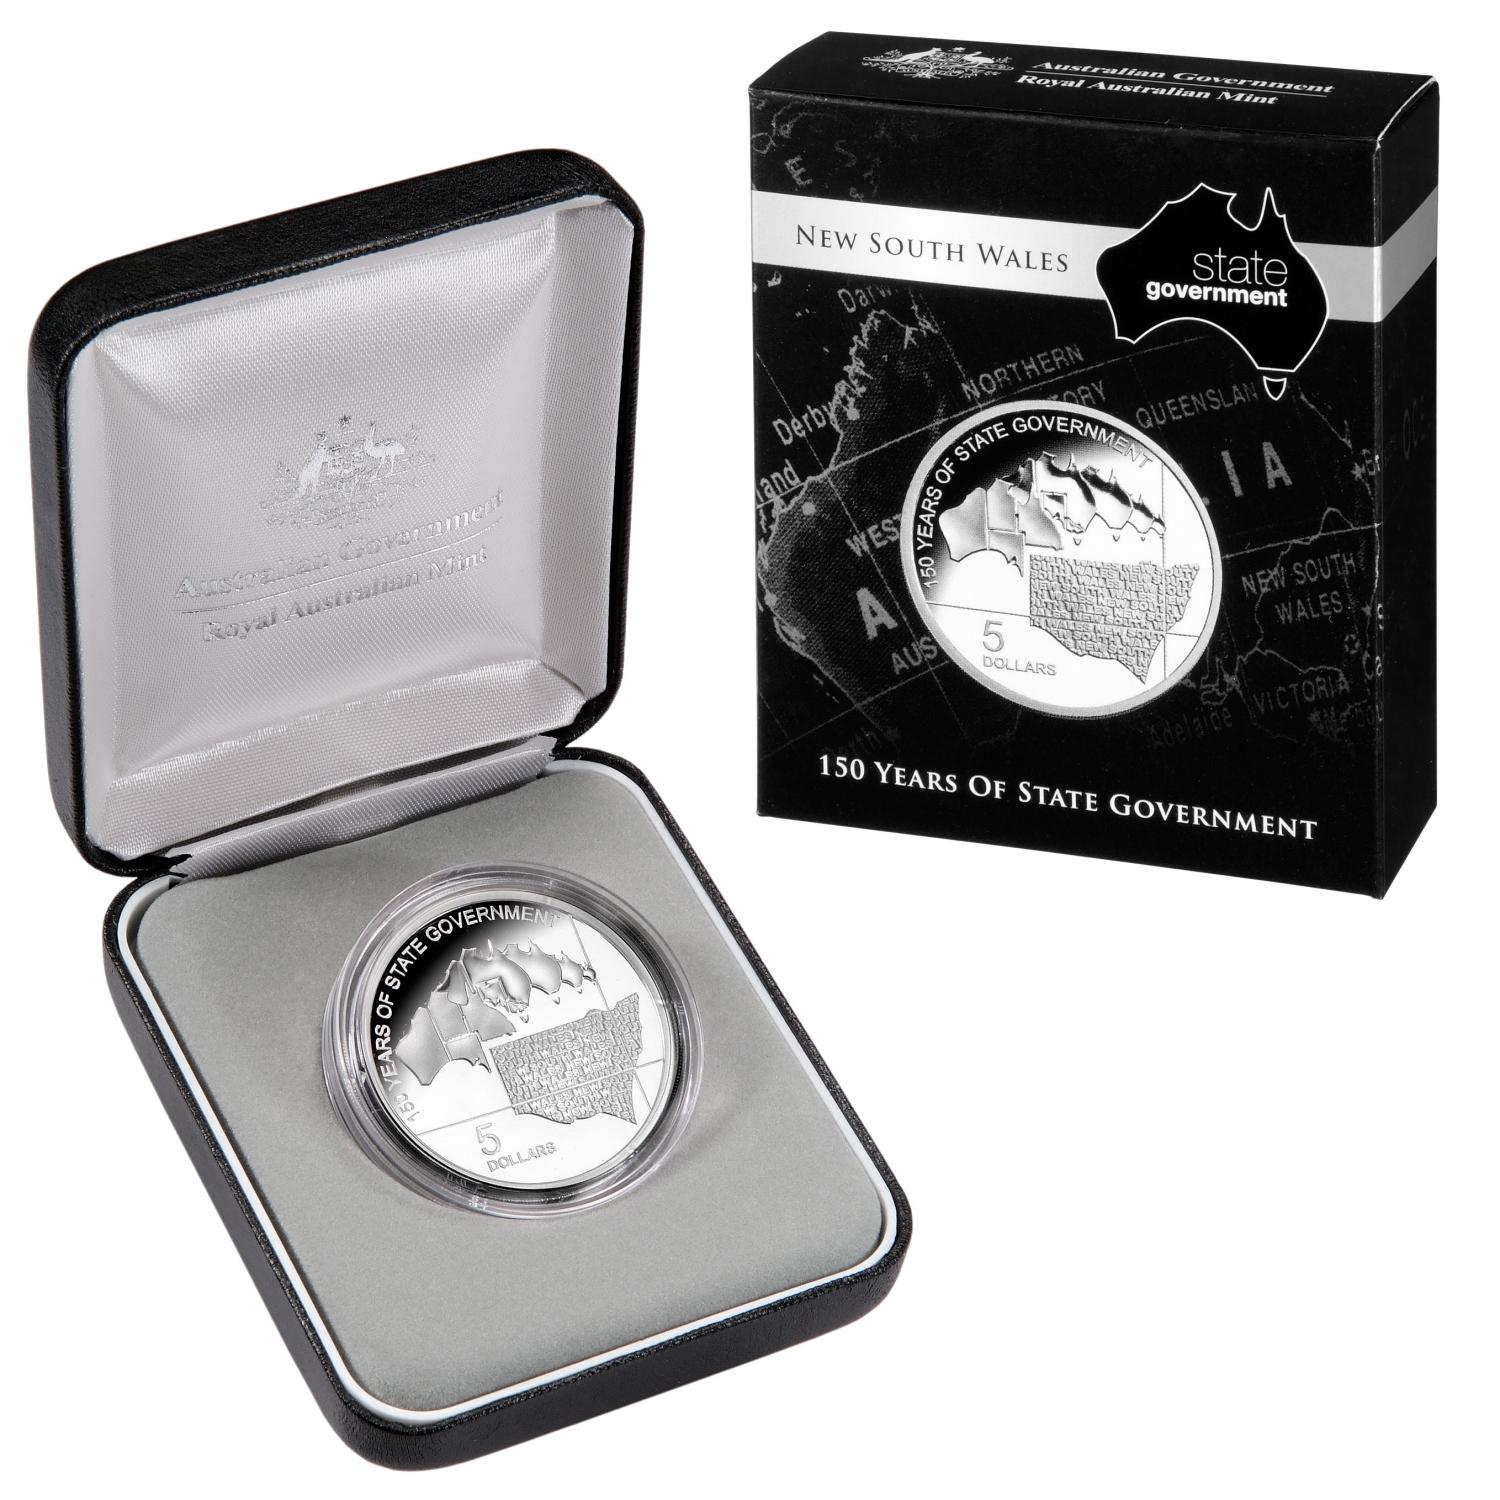 Thumbnail for 2006 $5.00 Silver Proof New South Wales 150 Years of State Government